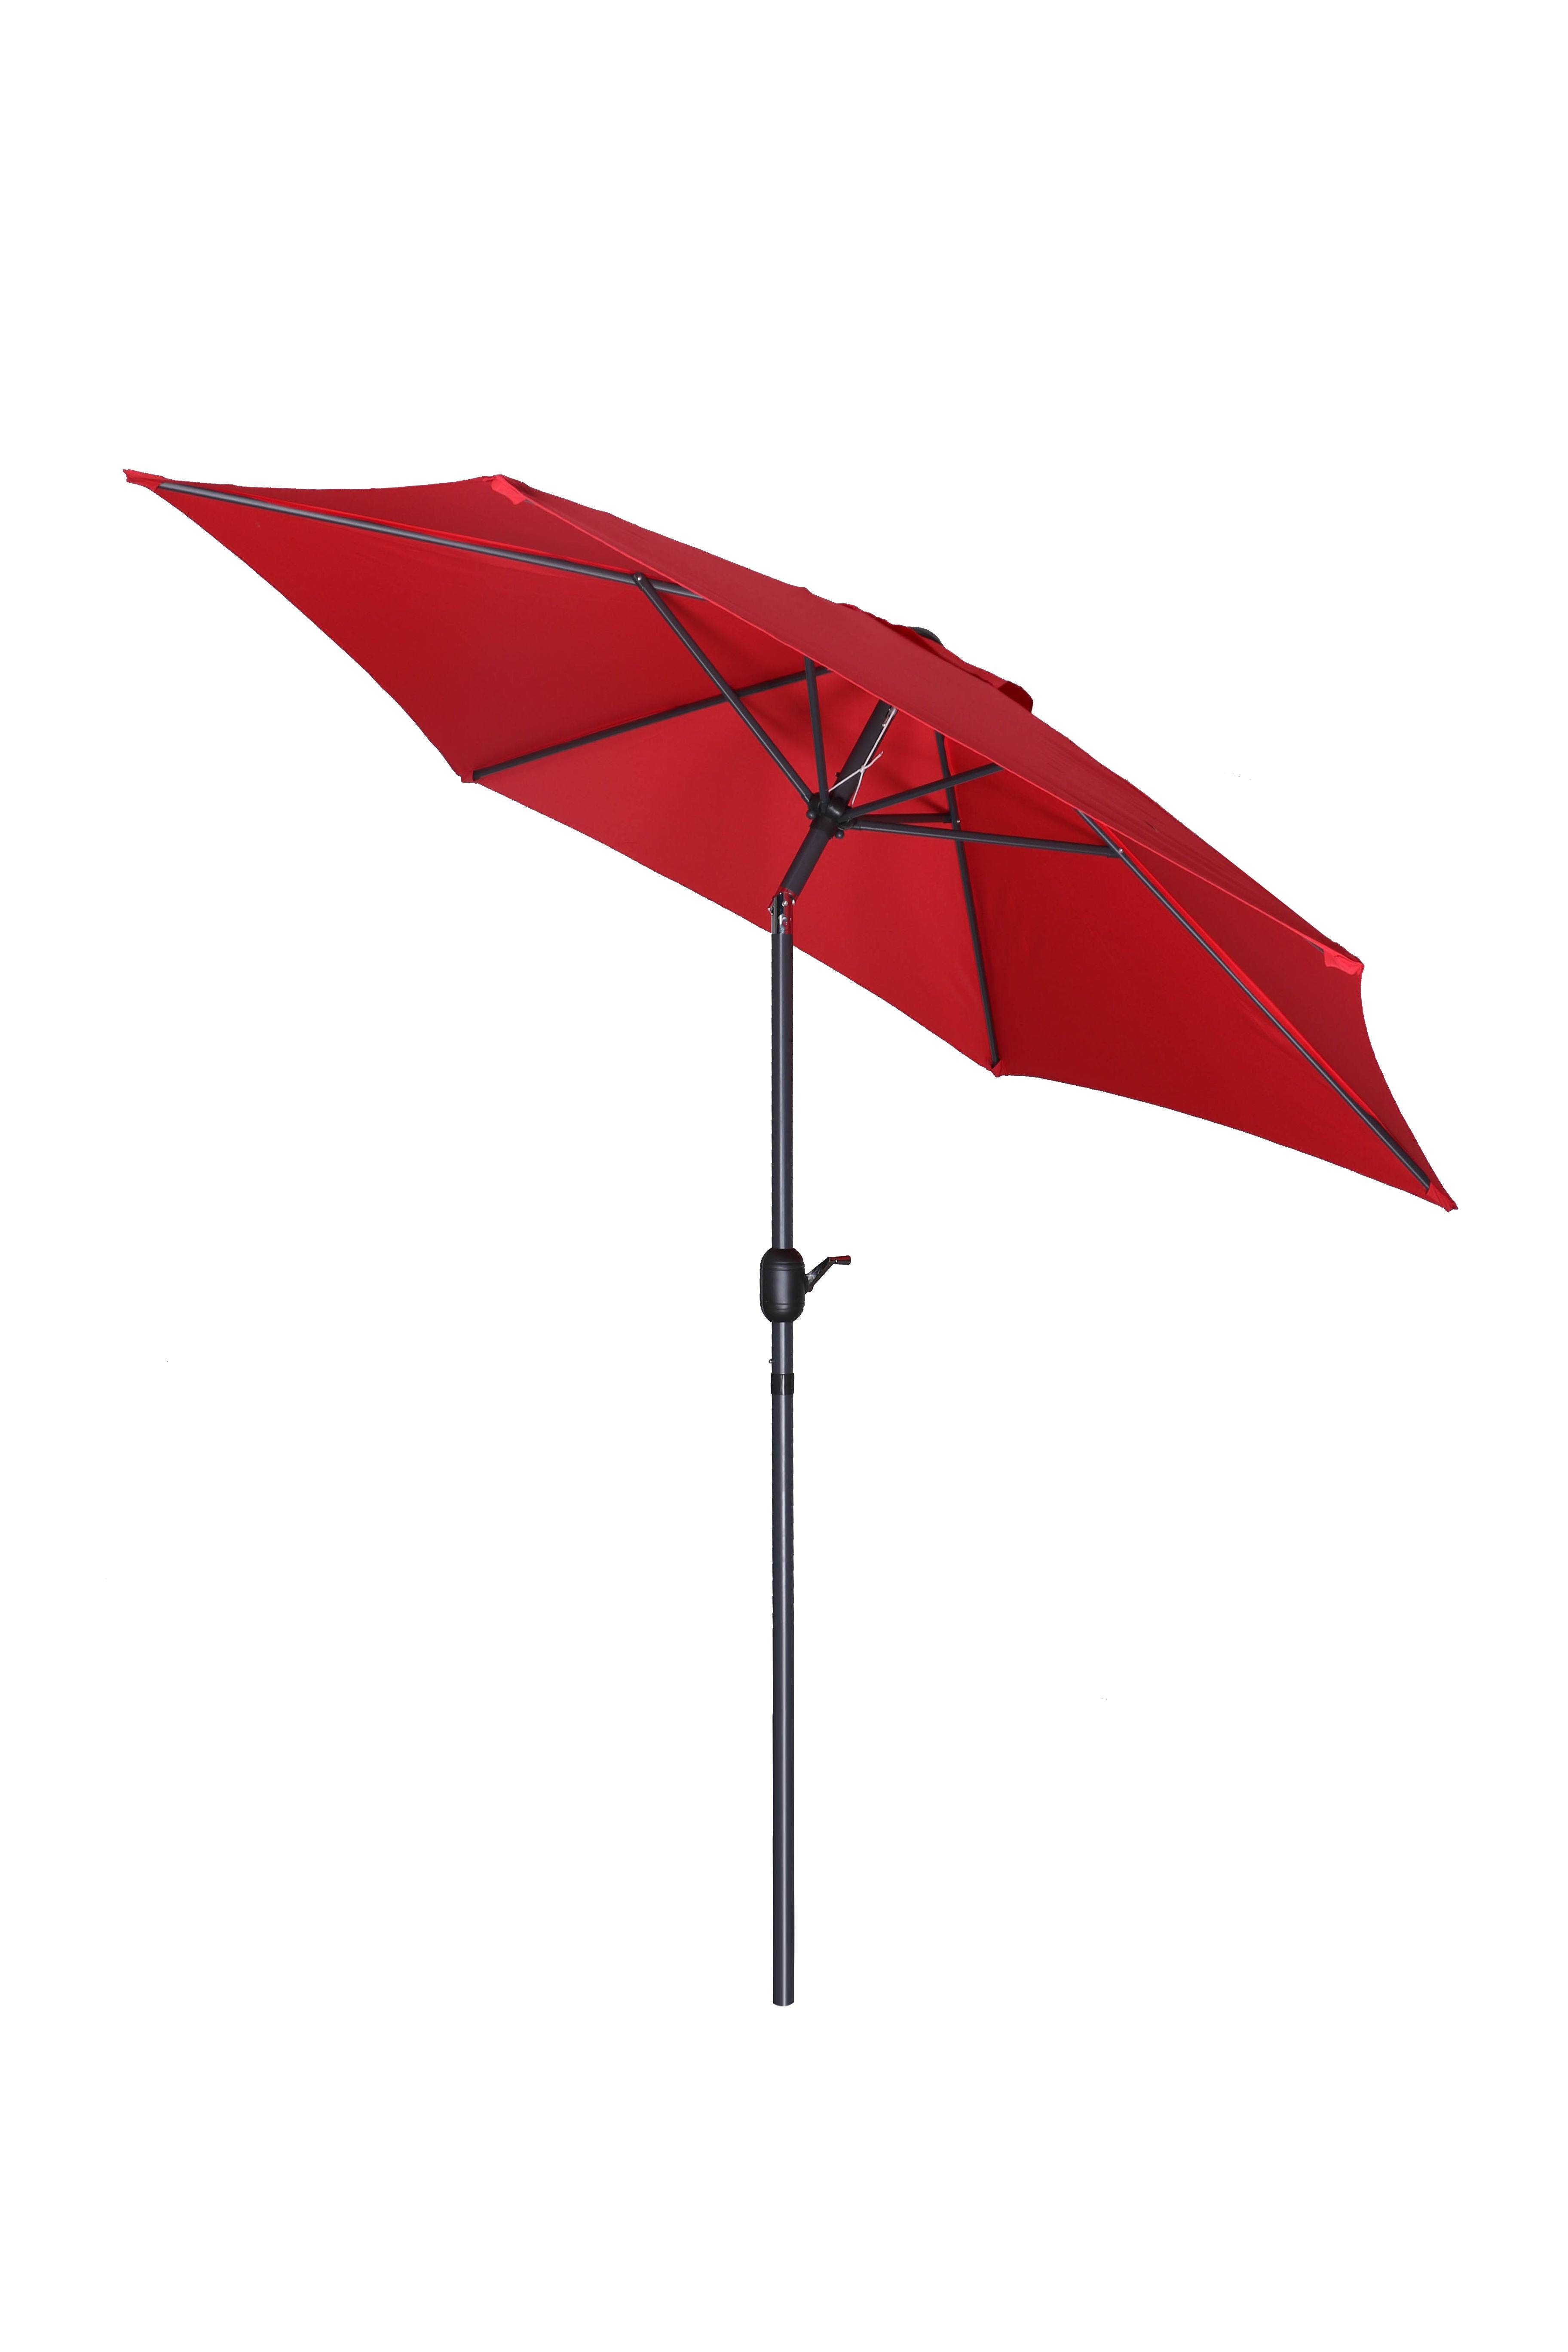 MOSS MOSS-T1204R - Red table umbrella 9', Alu Pole, Cover included